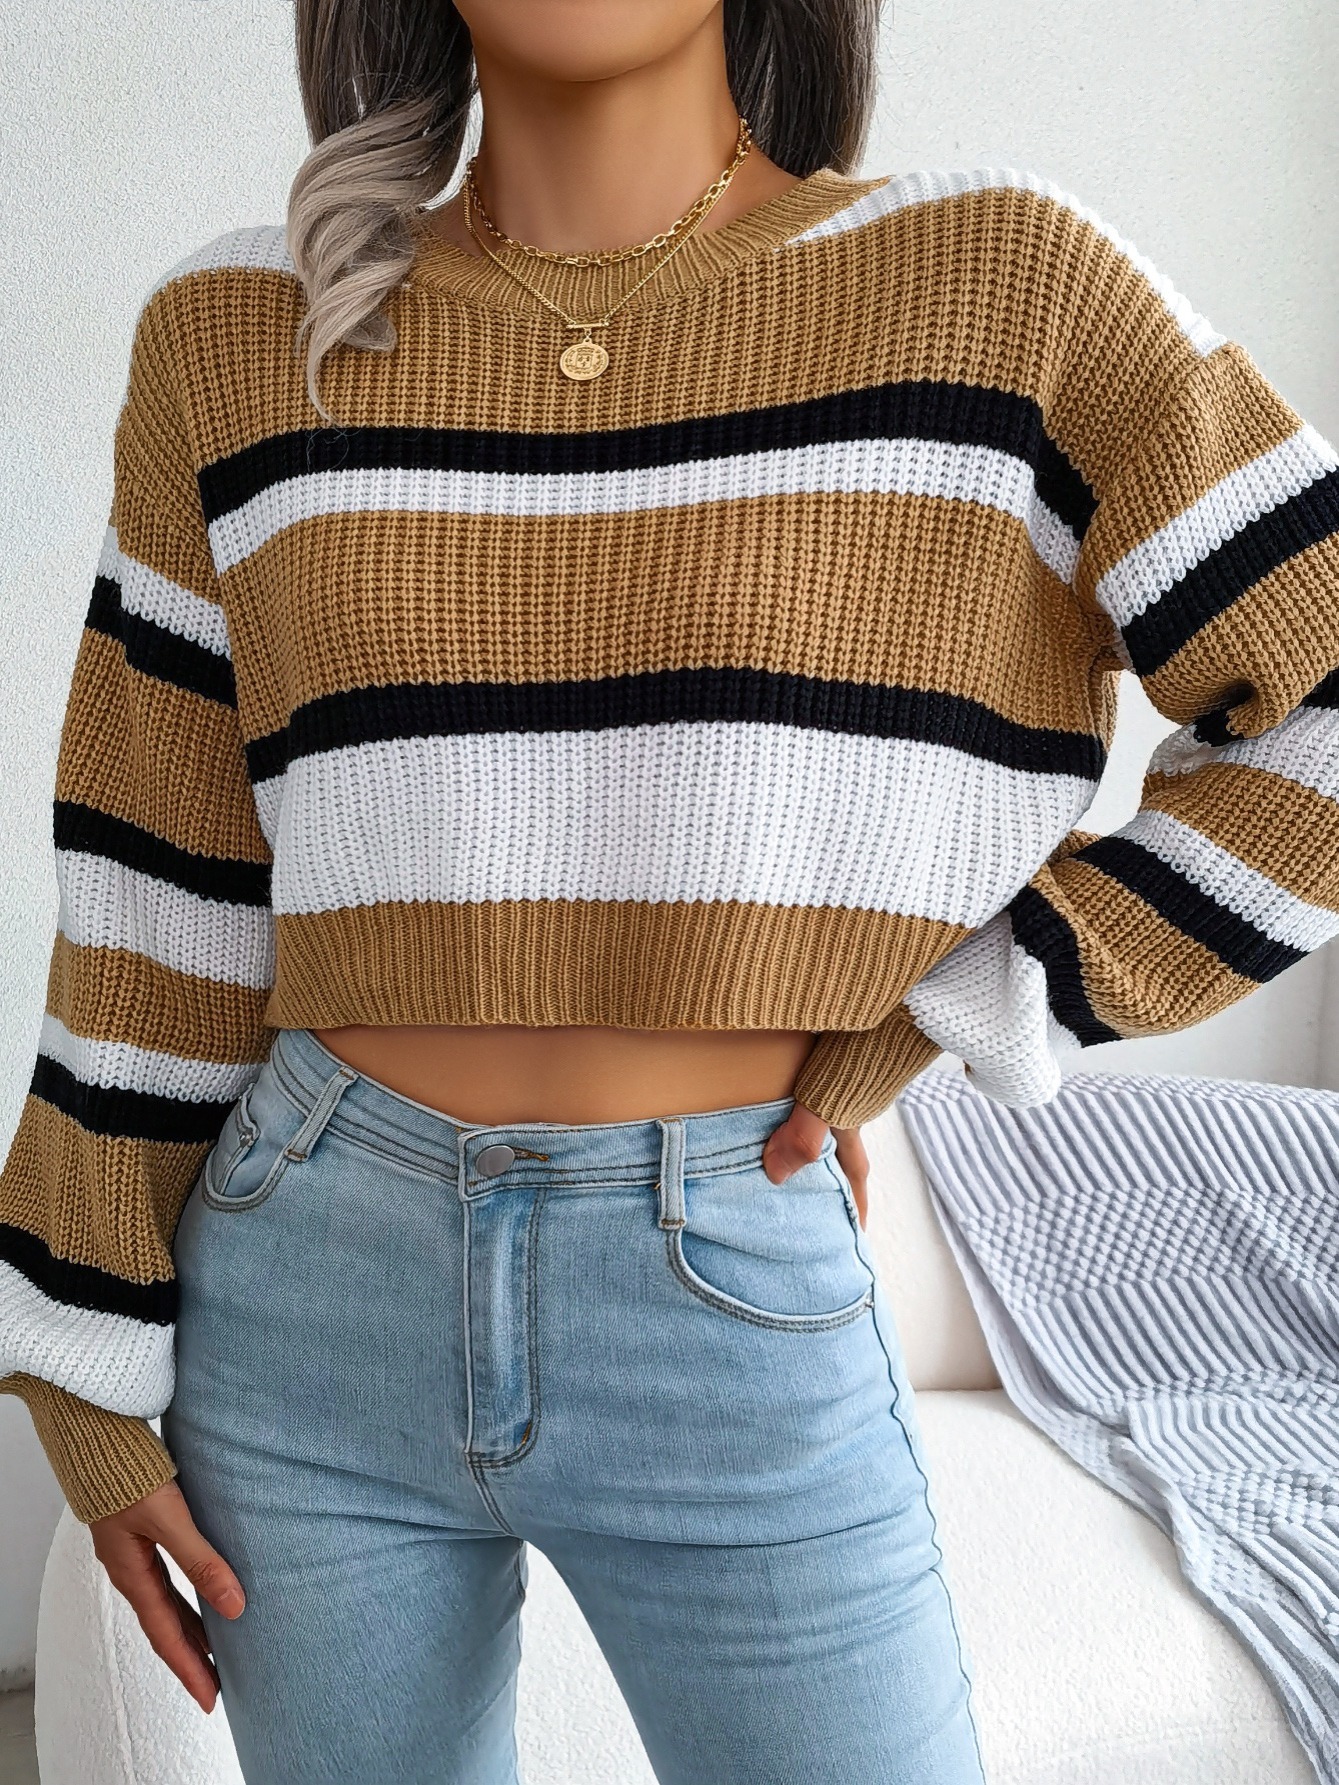 Knitted Tops, Knitted Crop Tops